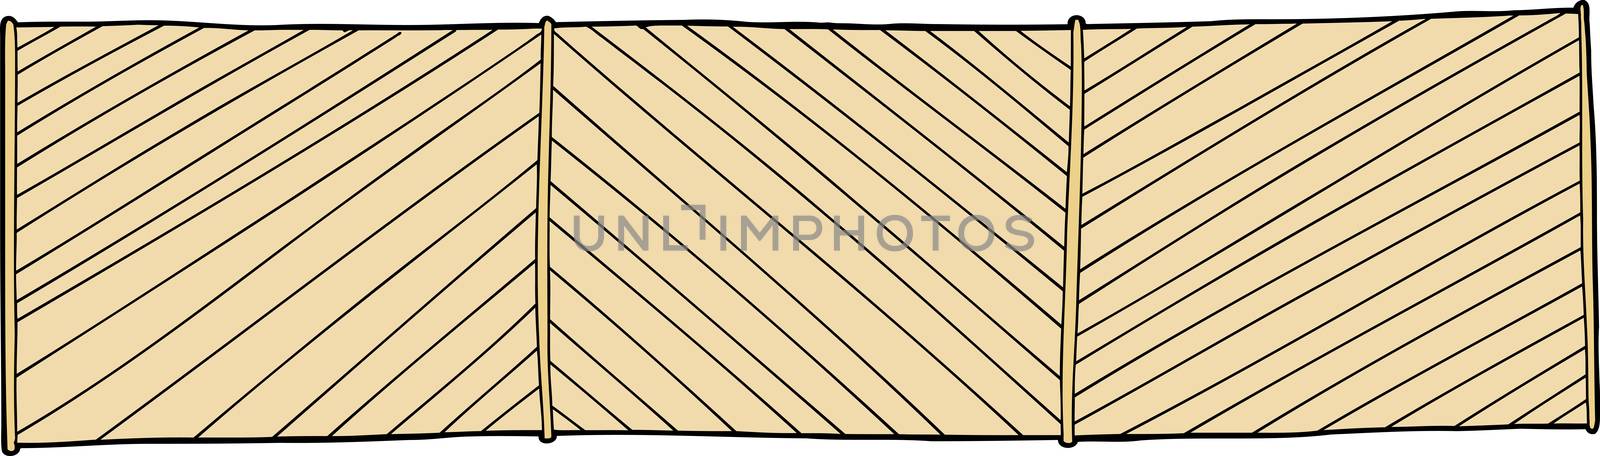 Wooden fence with slanted planks on white background